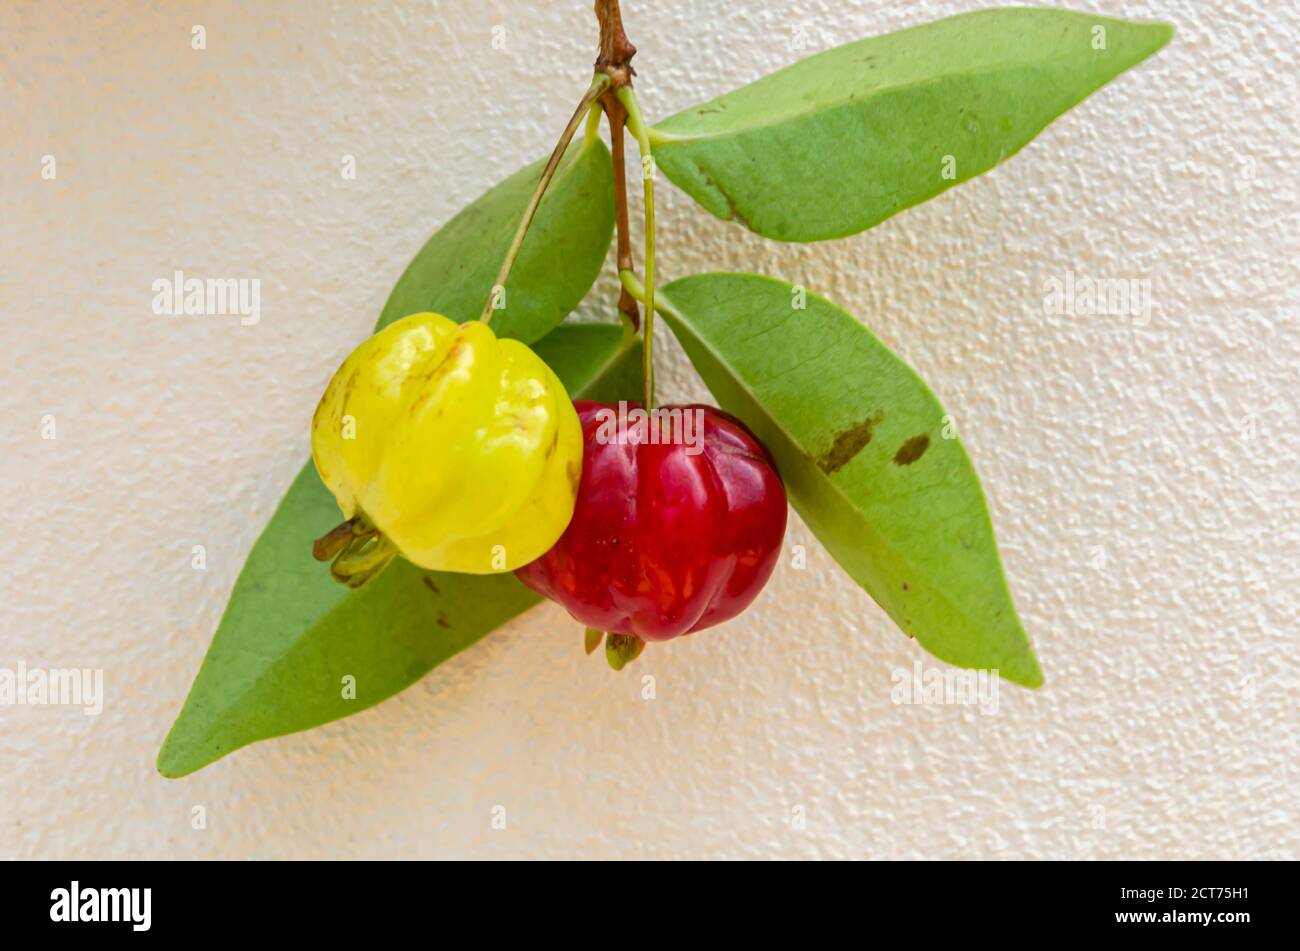 Fruits, And Abaxial Side Of Pitanga Leaf Stock Photo